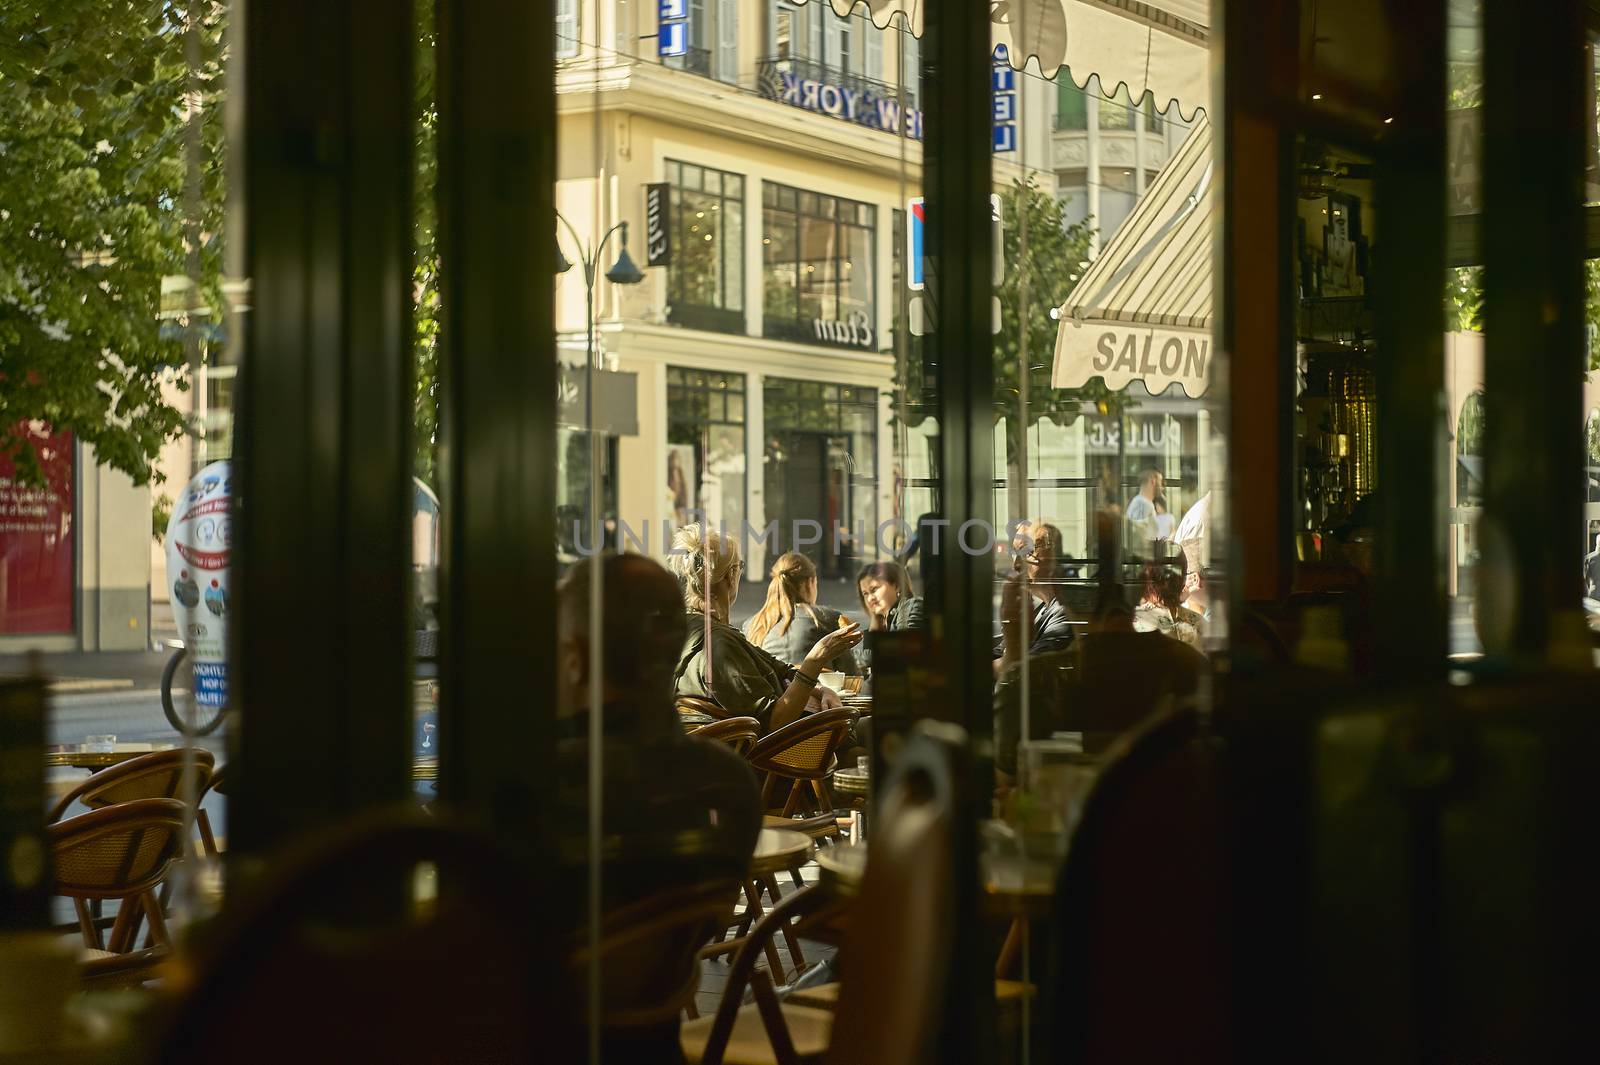 Detail of a daily life scene in the morning of Nice, breakfast in a bar on a central street.